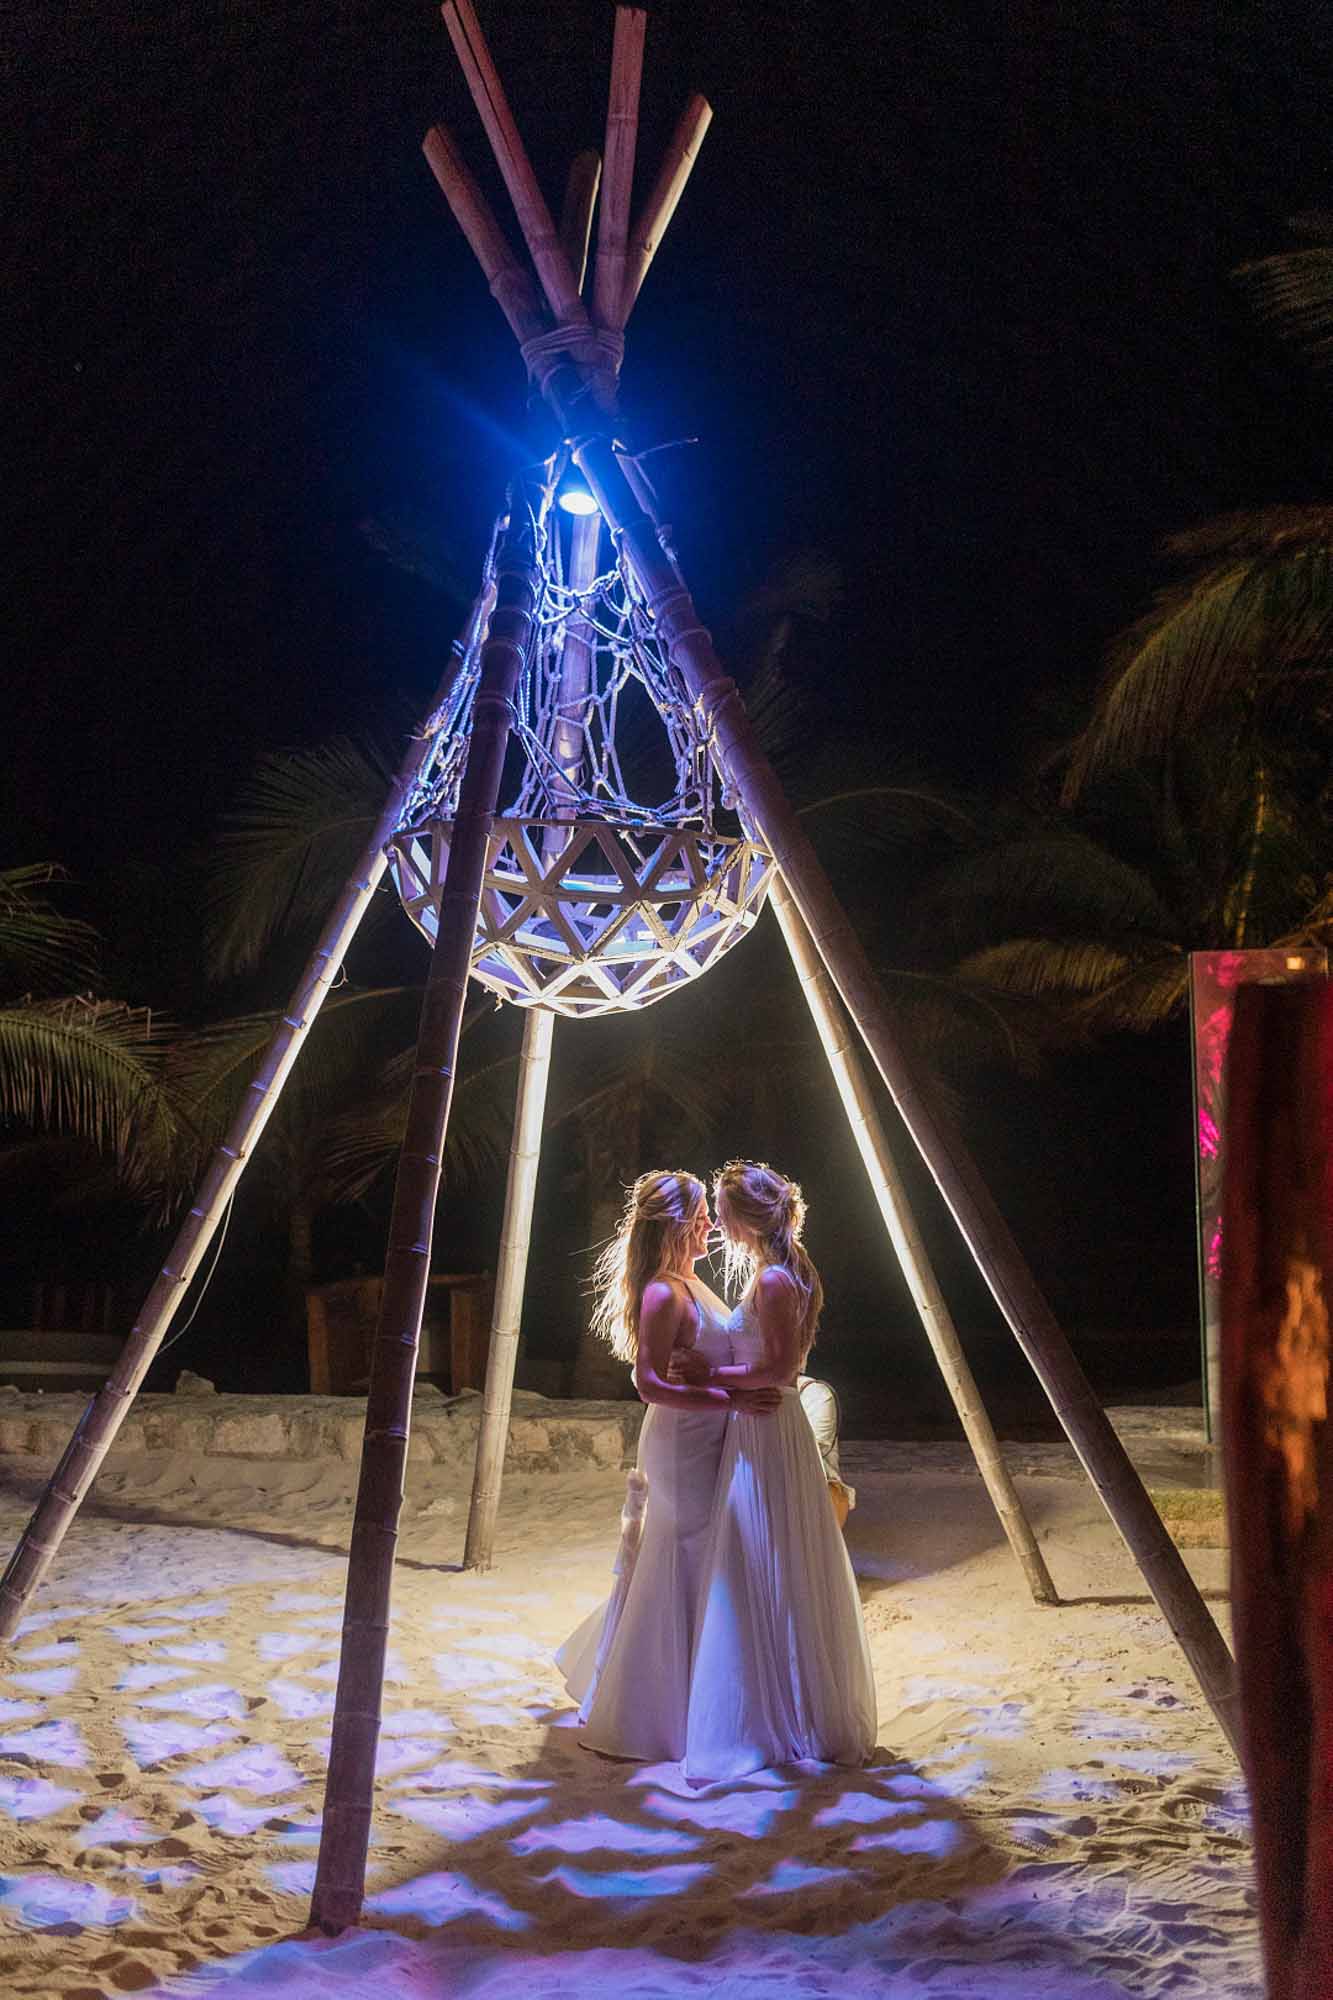 Shoes were optional at this casual Mexico wedding on the beach | Moni & Adri Weddings | Featured on Equally Wed, the leading LGBTQ+ wedding magazine